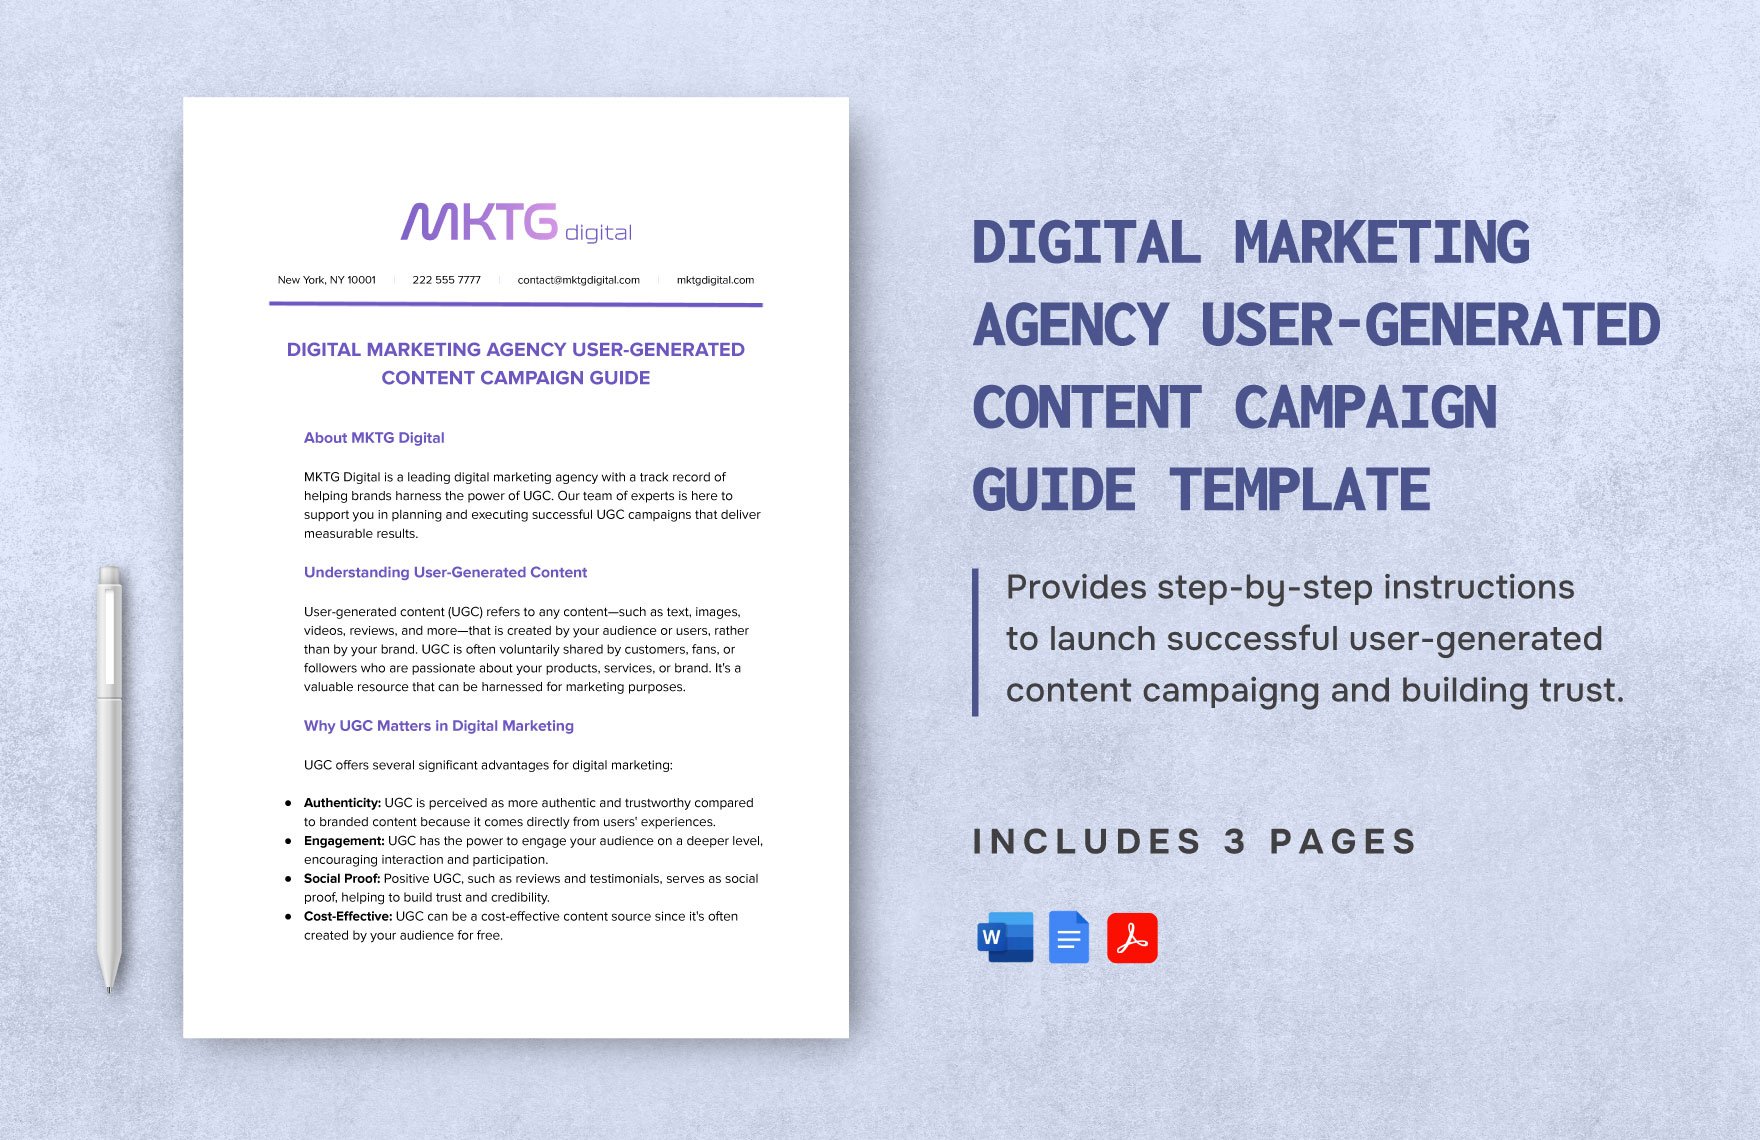 Digital Marketing Agency User-Generated Content Campaign Guide Template in Word, Google Docs, PDF